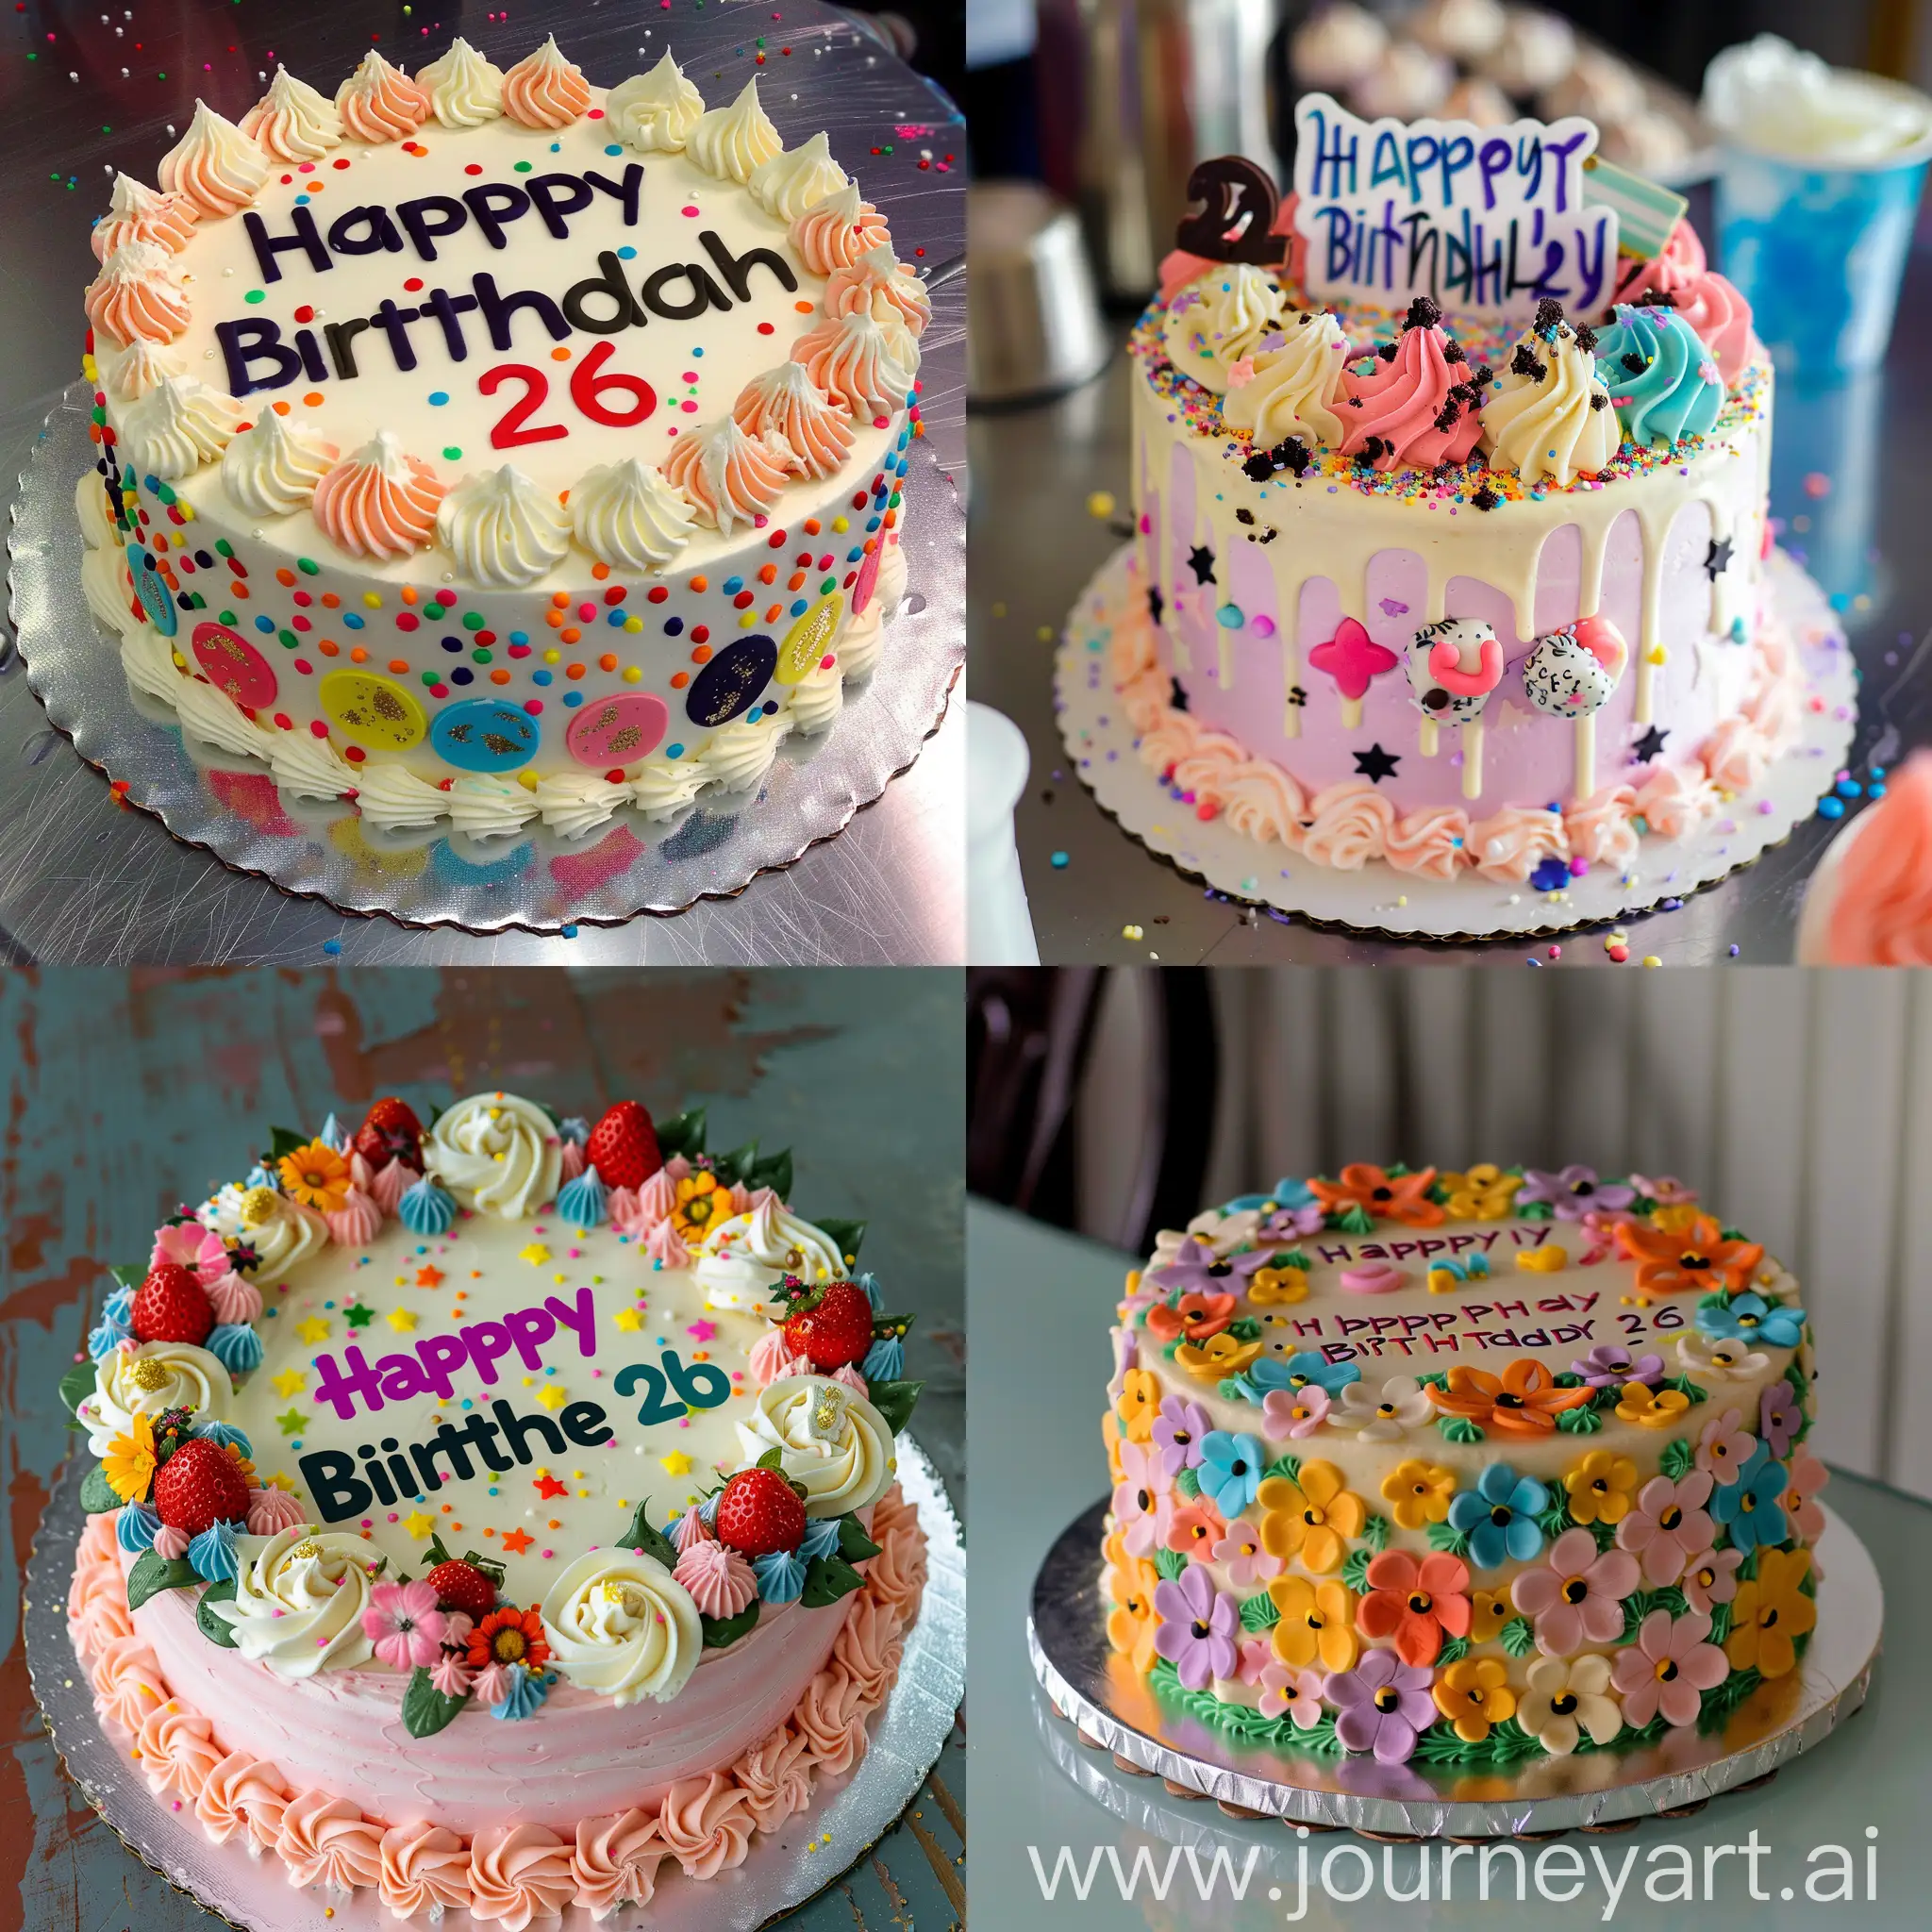 Colorful-Birthday-Cake-with-Personalized-Decoration-for-Britneys-26th-Birthday-Celebration